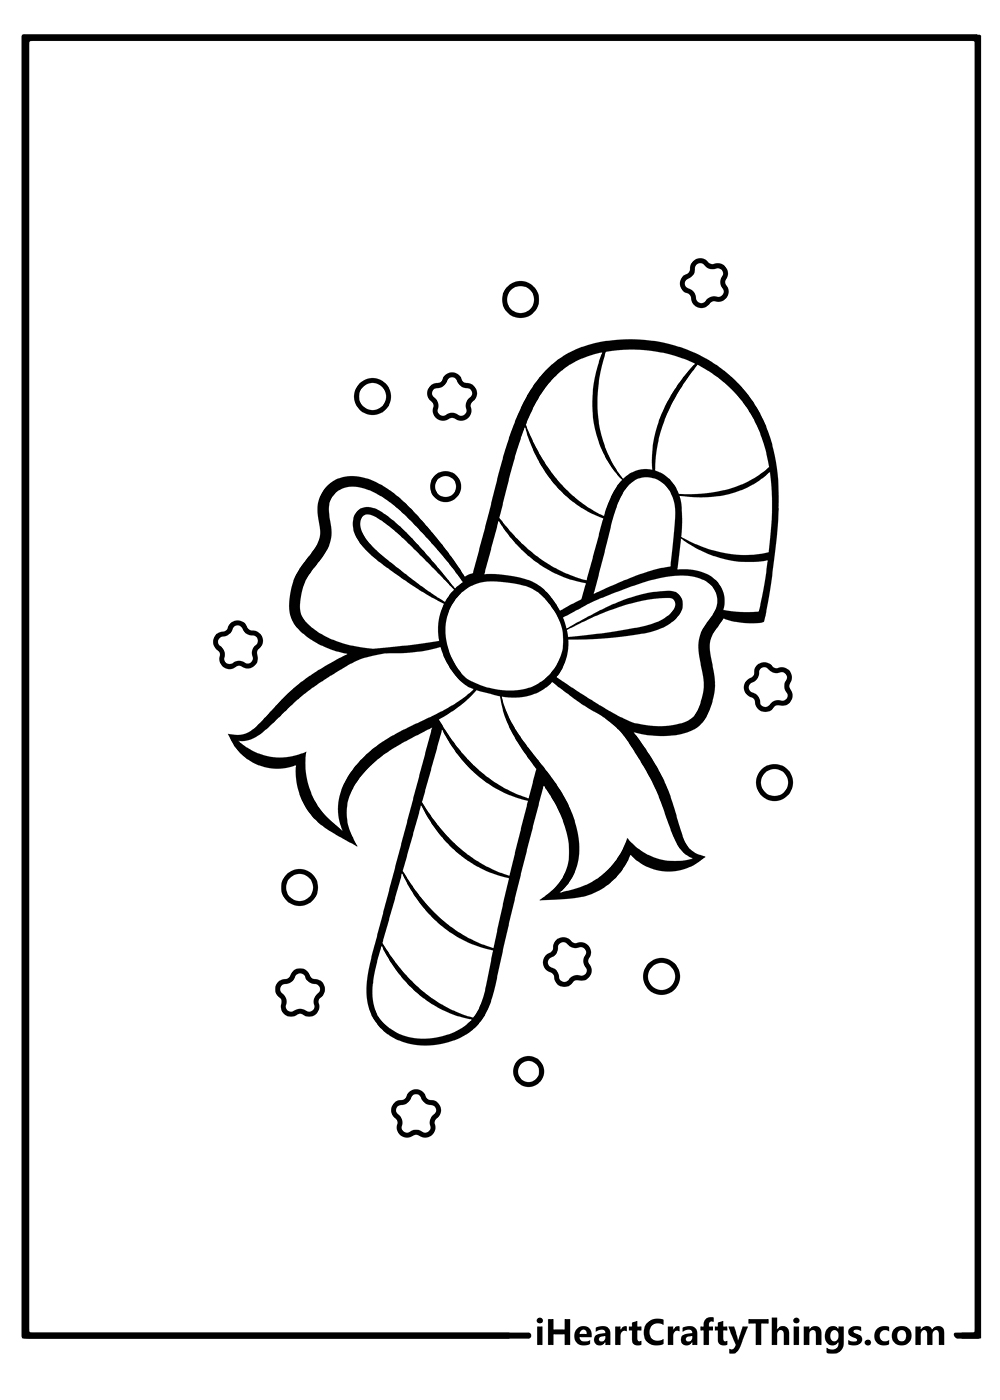 Christmas Coloring Pages free printable